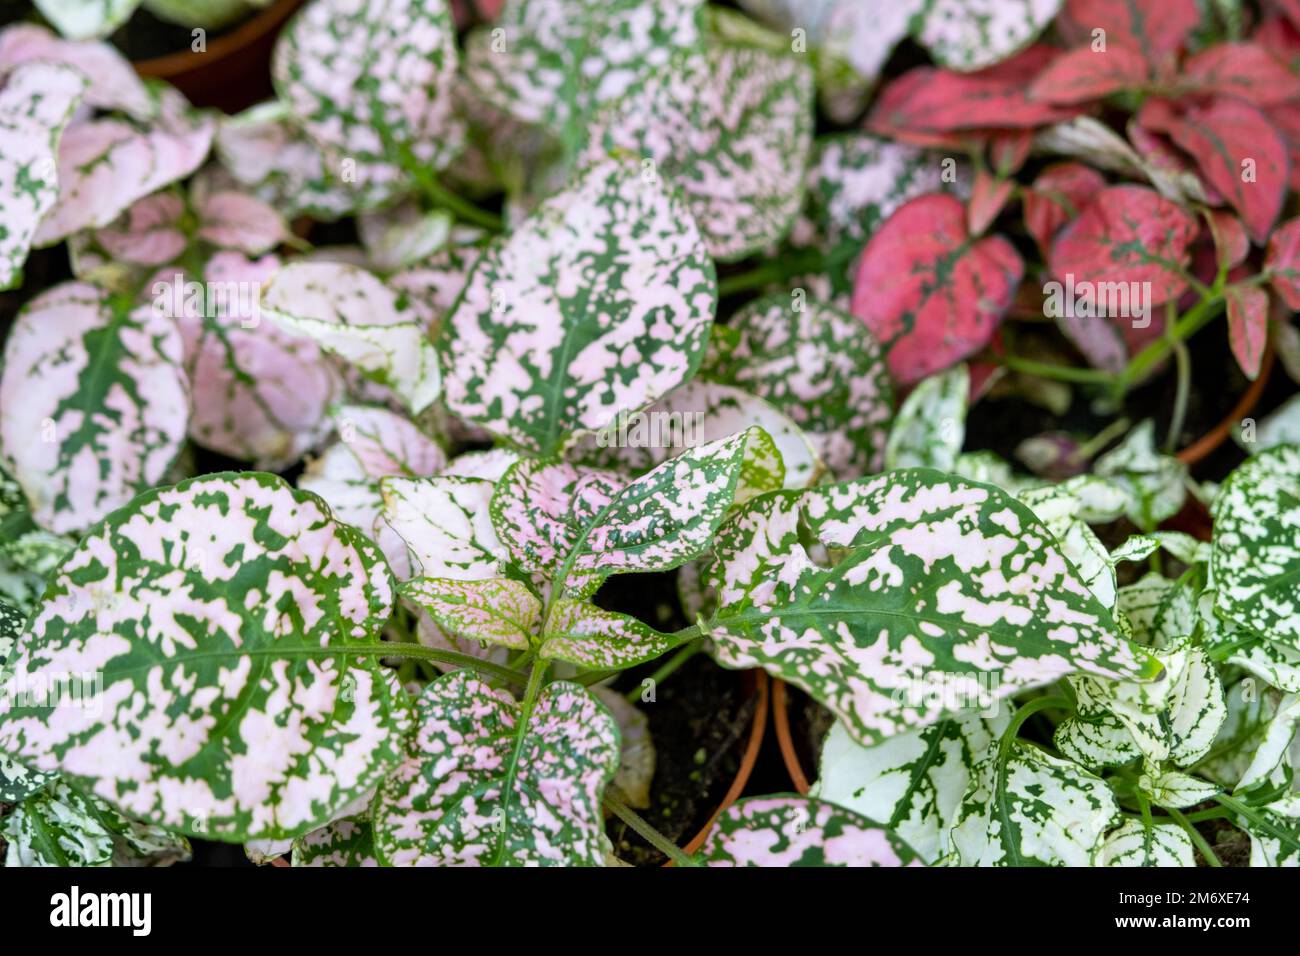 The assortment of home plants pilea on the shelf of the flower shop. Watermelon pilea, Pilea cadierei, a variety of colorful lea Stock Photo